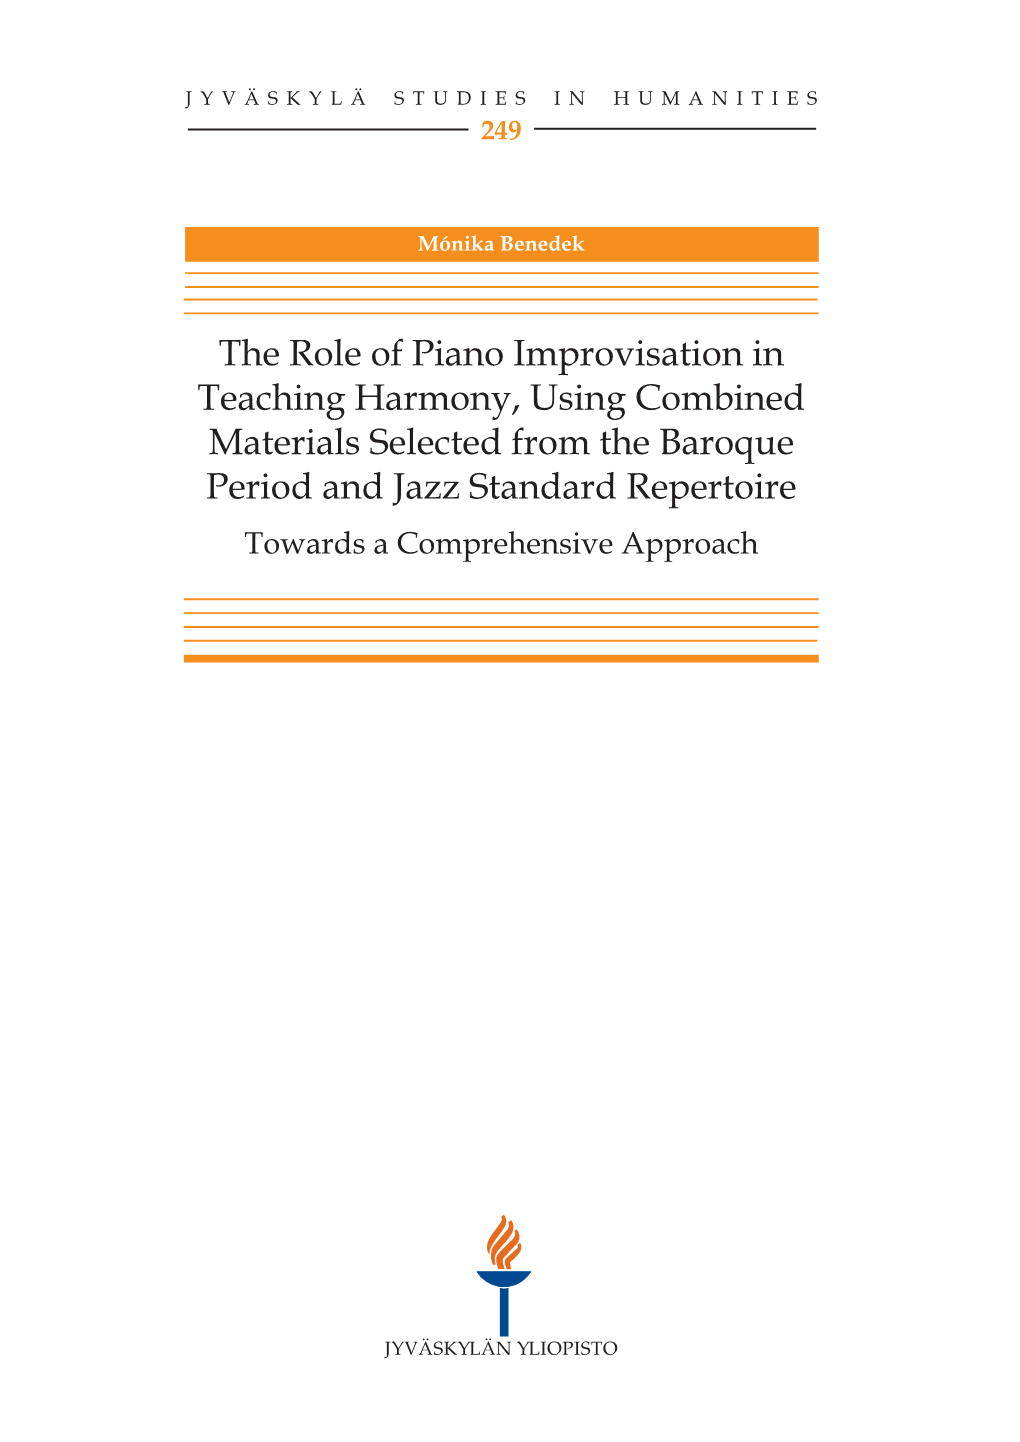 The Role of Piano Improvisation in Teaching Harmony, Using Combined